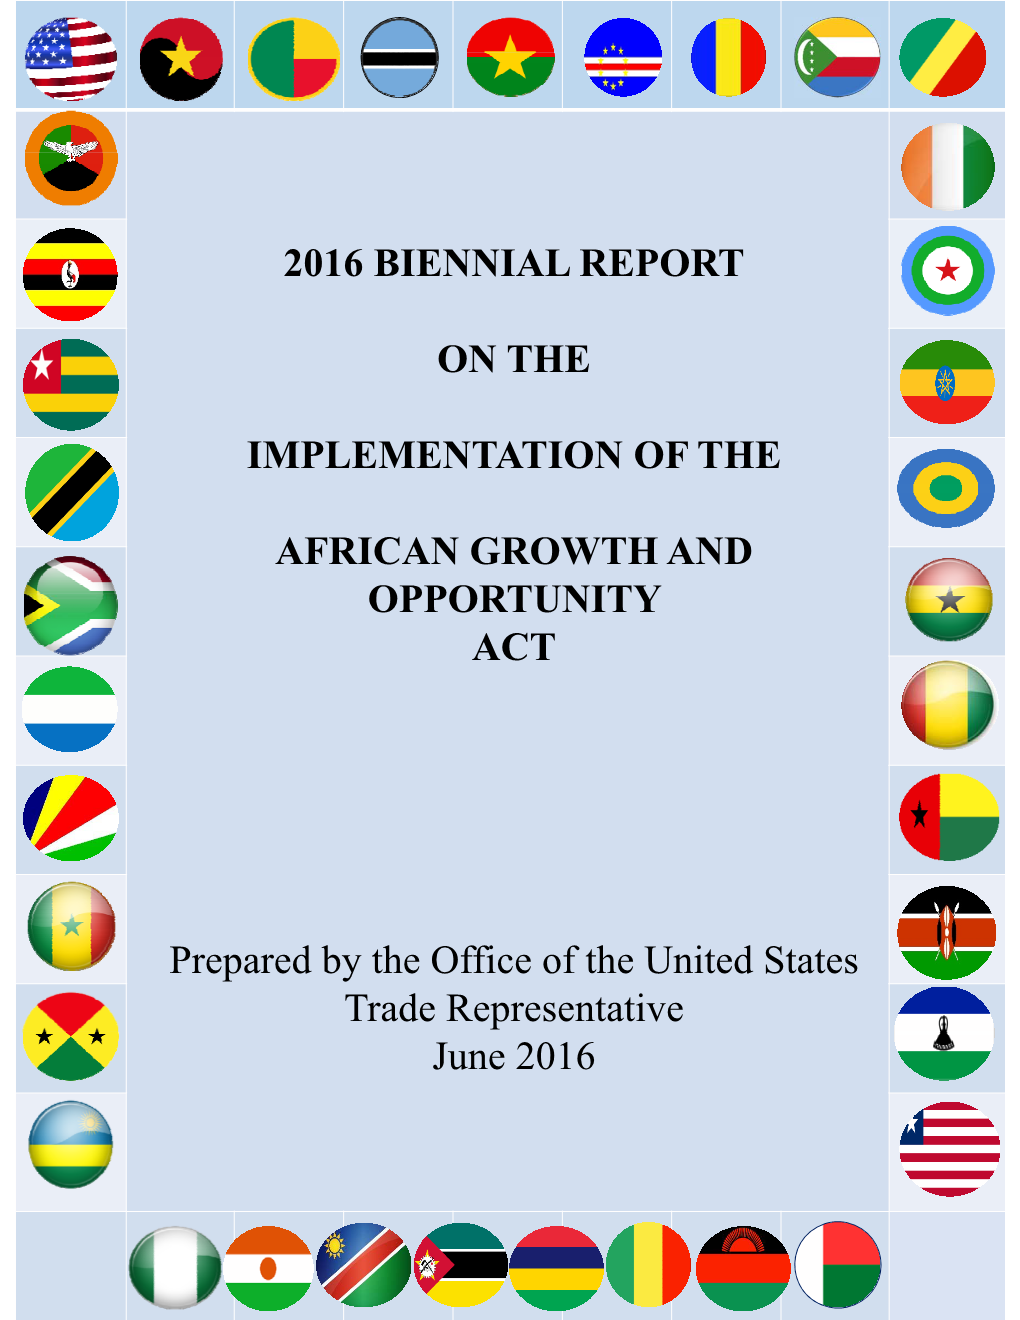 2016 Biennial Report on the Implementation of the African Growth and Opportunity Act